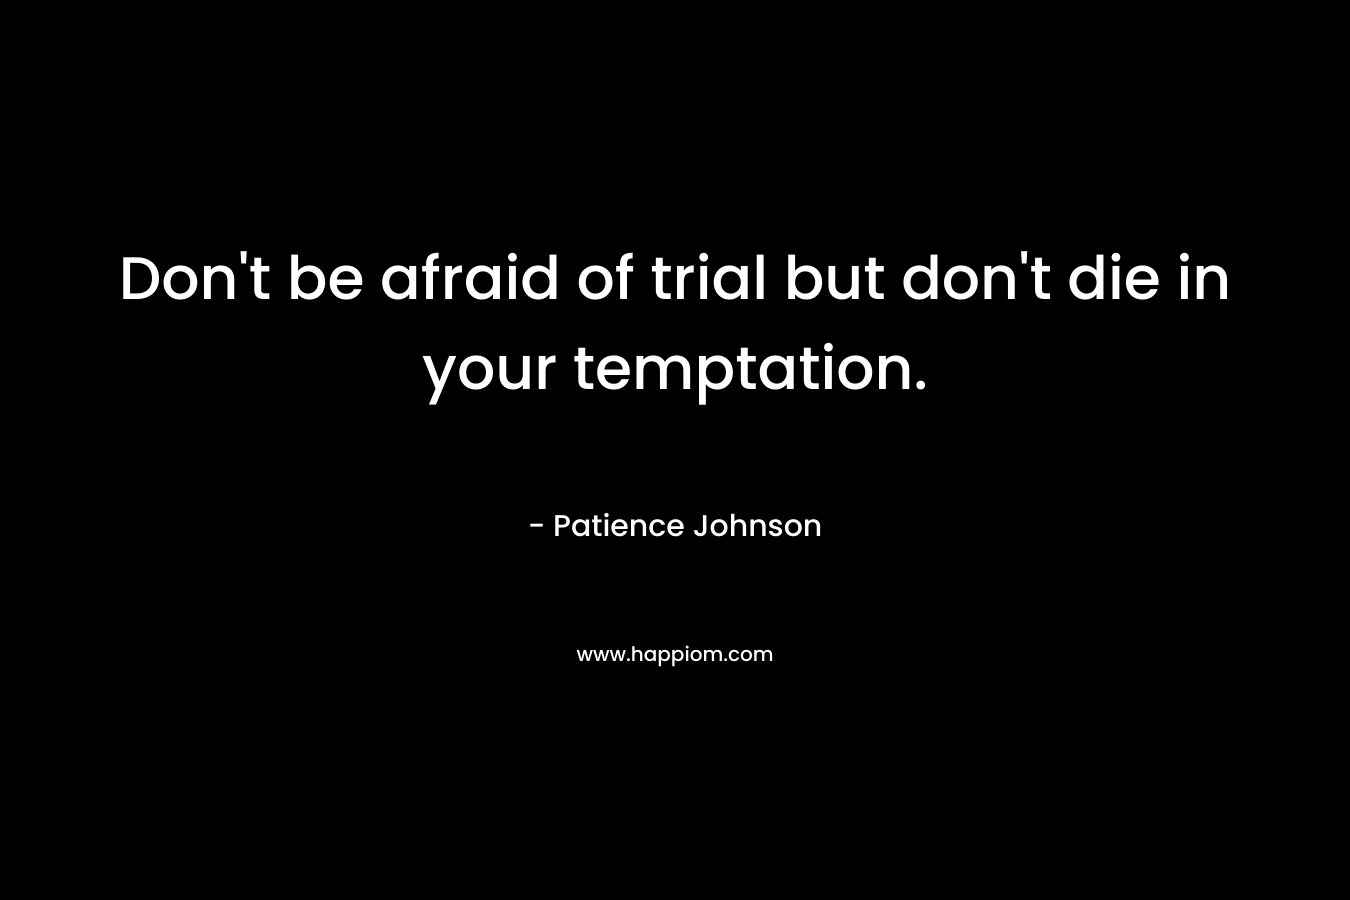 Don’t be afraid of trial but don’t die in your temptation. – Patience Johnson